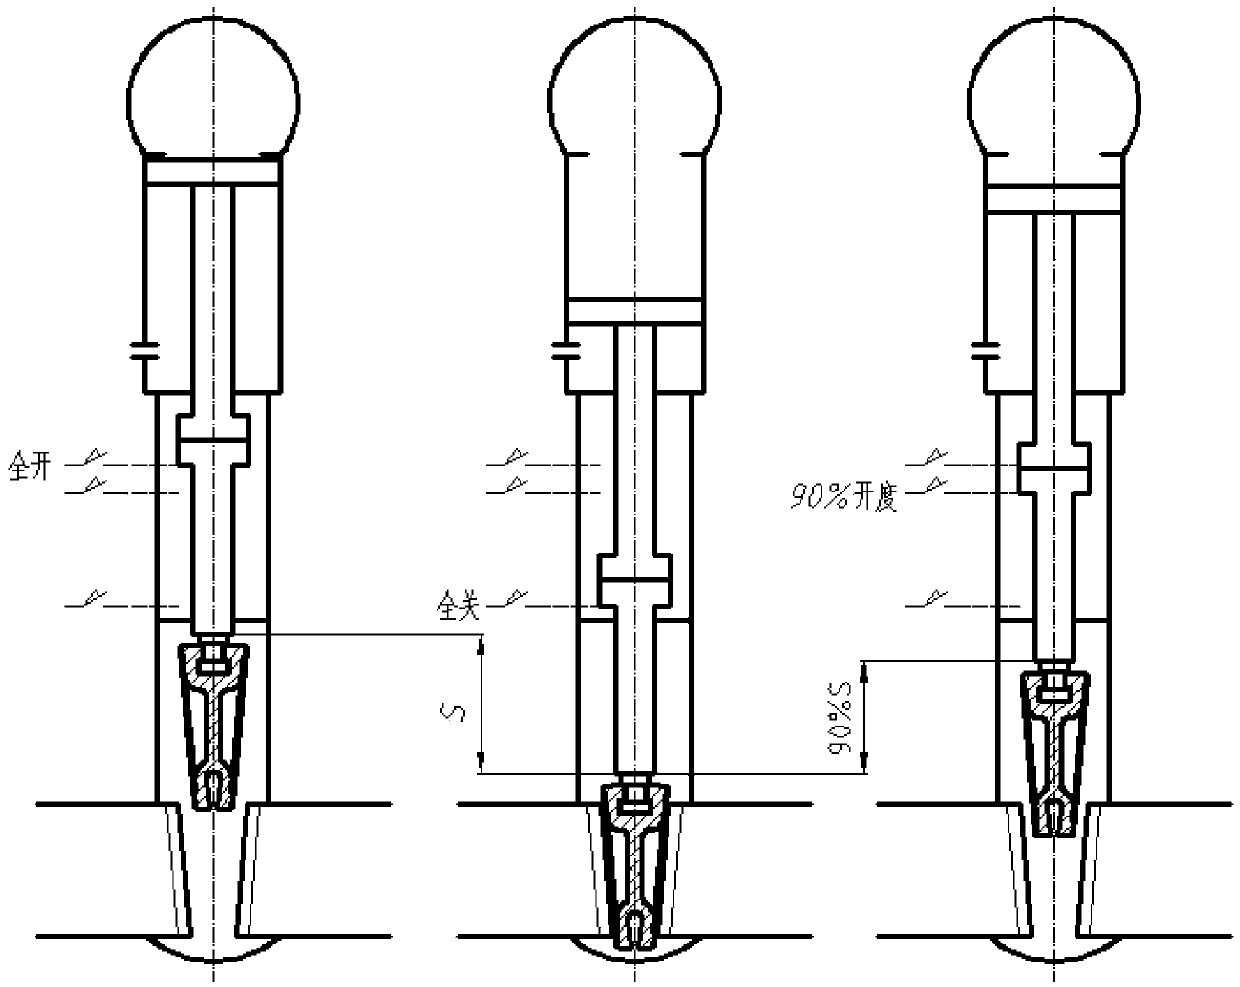 A gas-hydraulic linkage quick-closing valve system